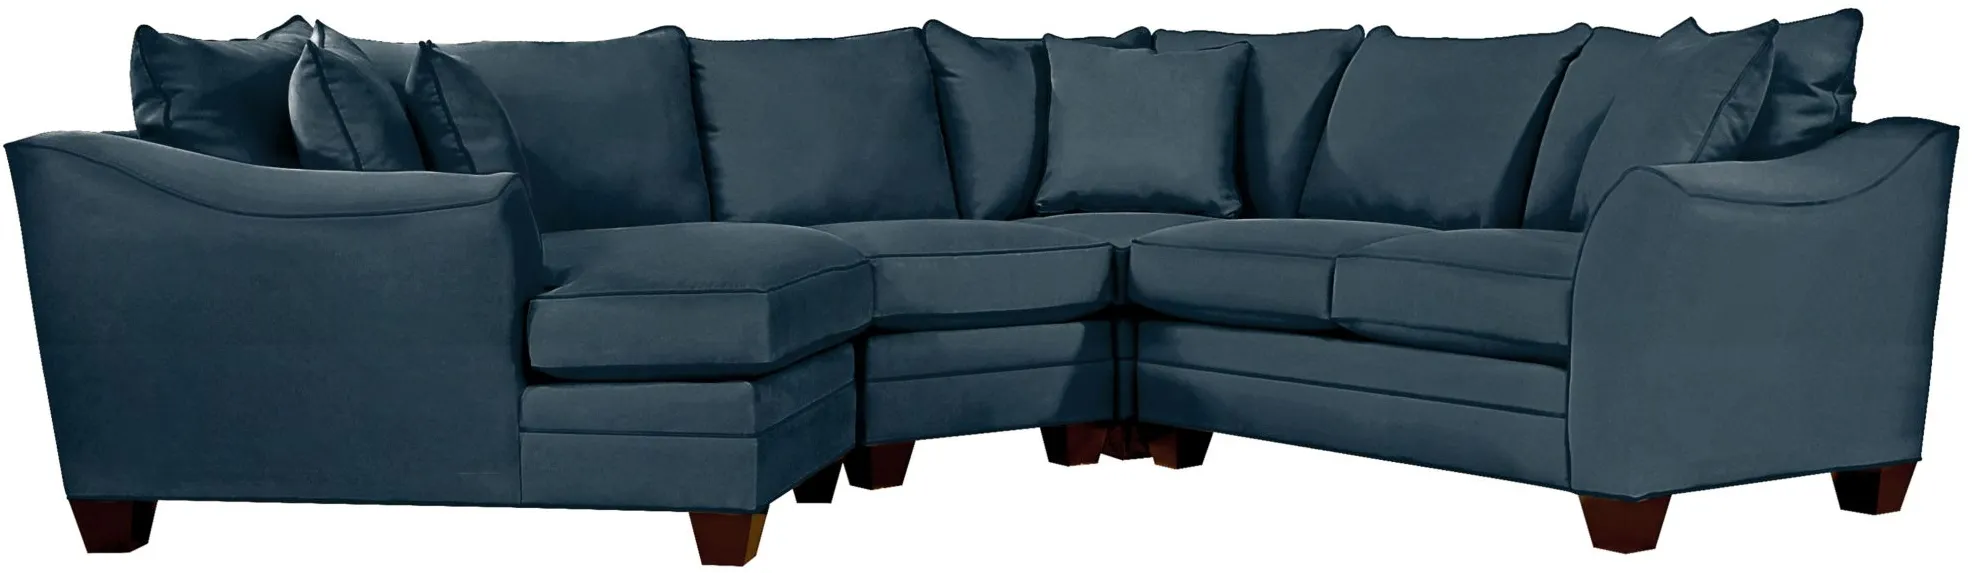 Foresthill 4-pc. Left Hand Cuddler Sectional Sofa in Suede So Soft Midnight by H.M. Richards